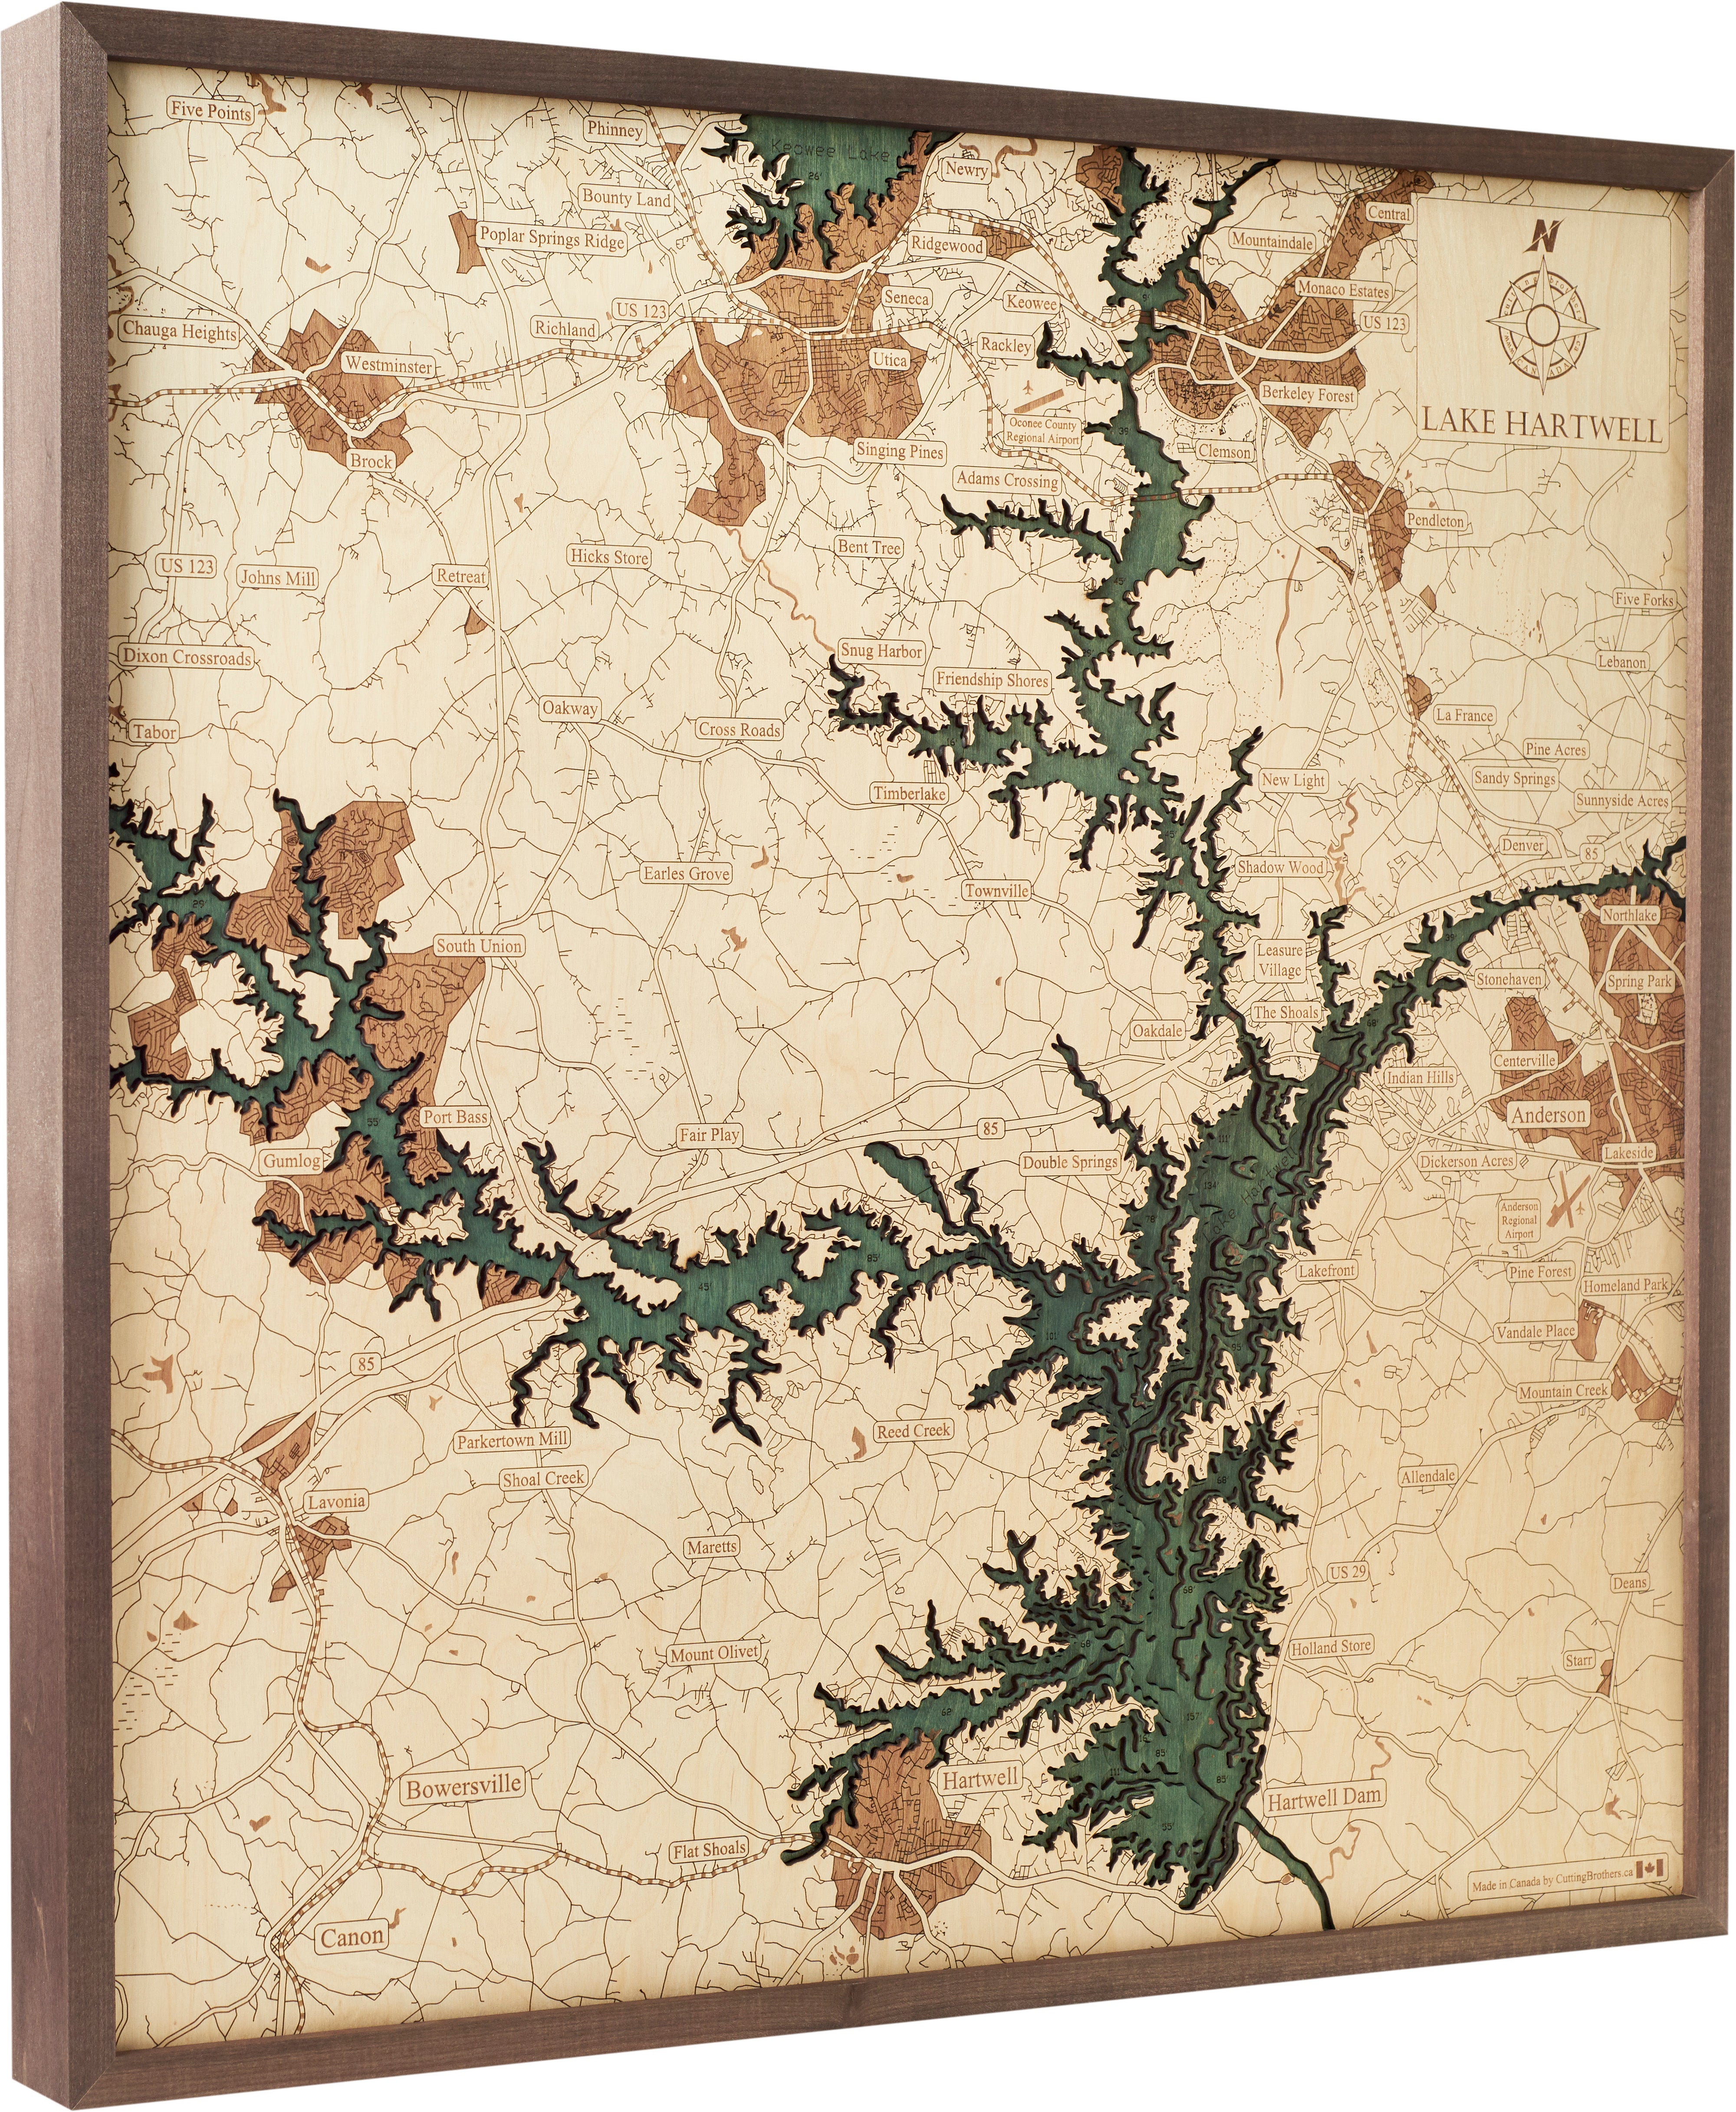 LAKE HARTWELL 3D WOODEN WALL MAP - Version L